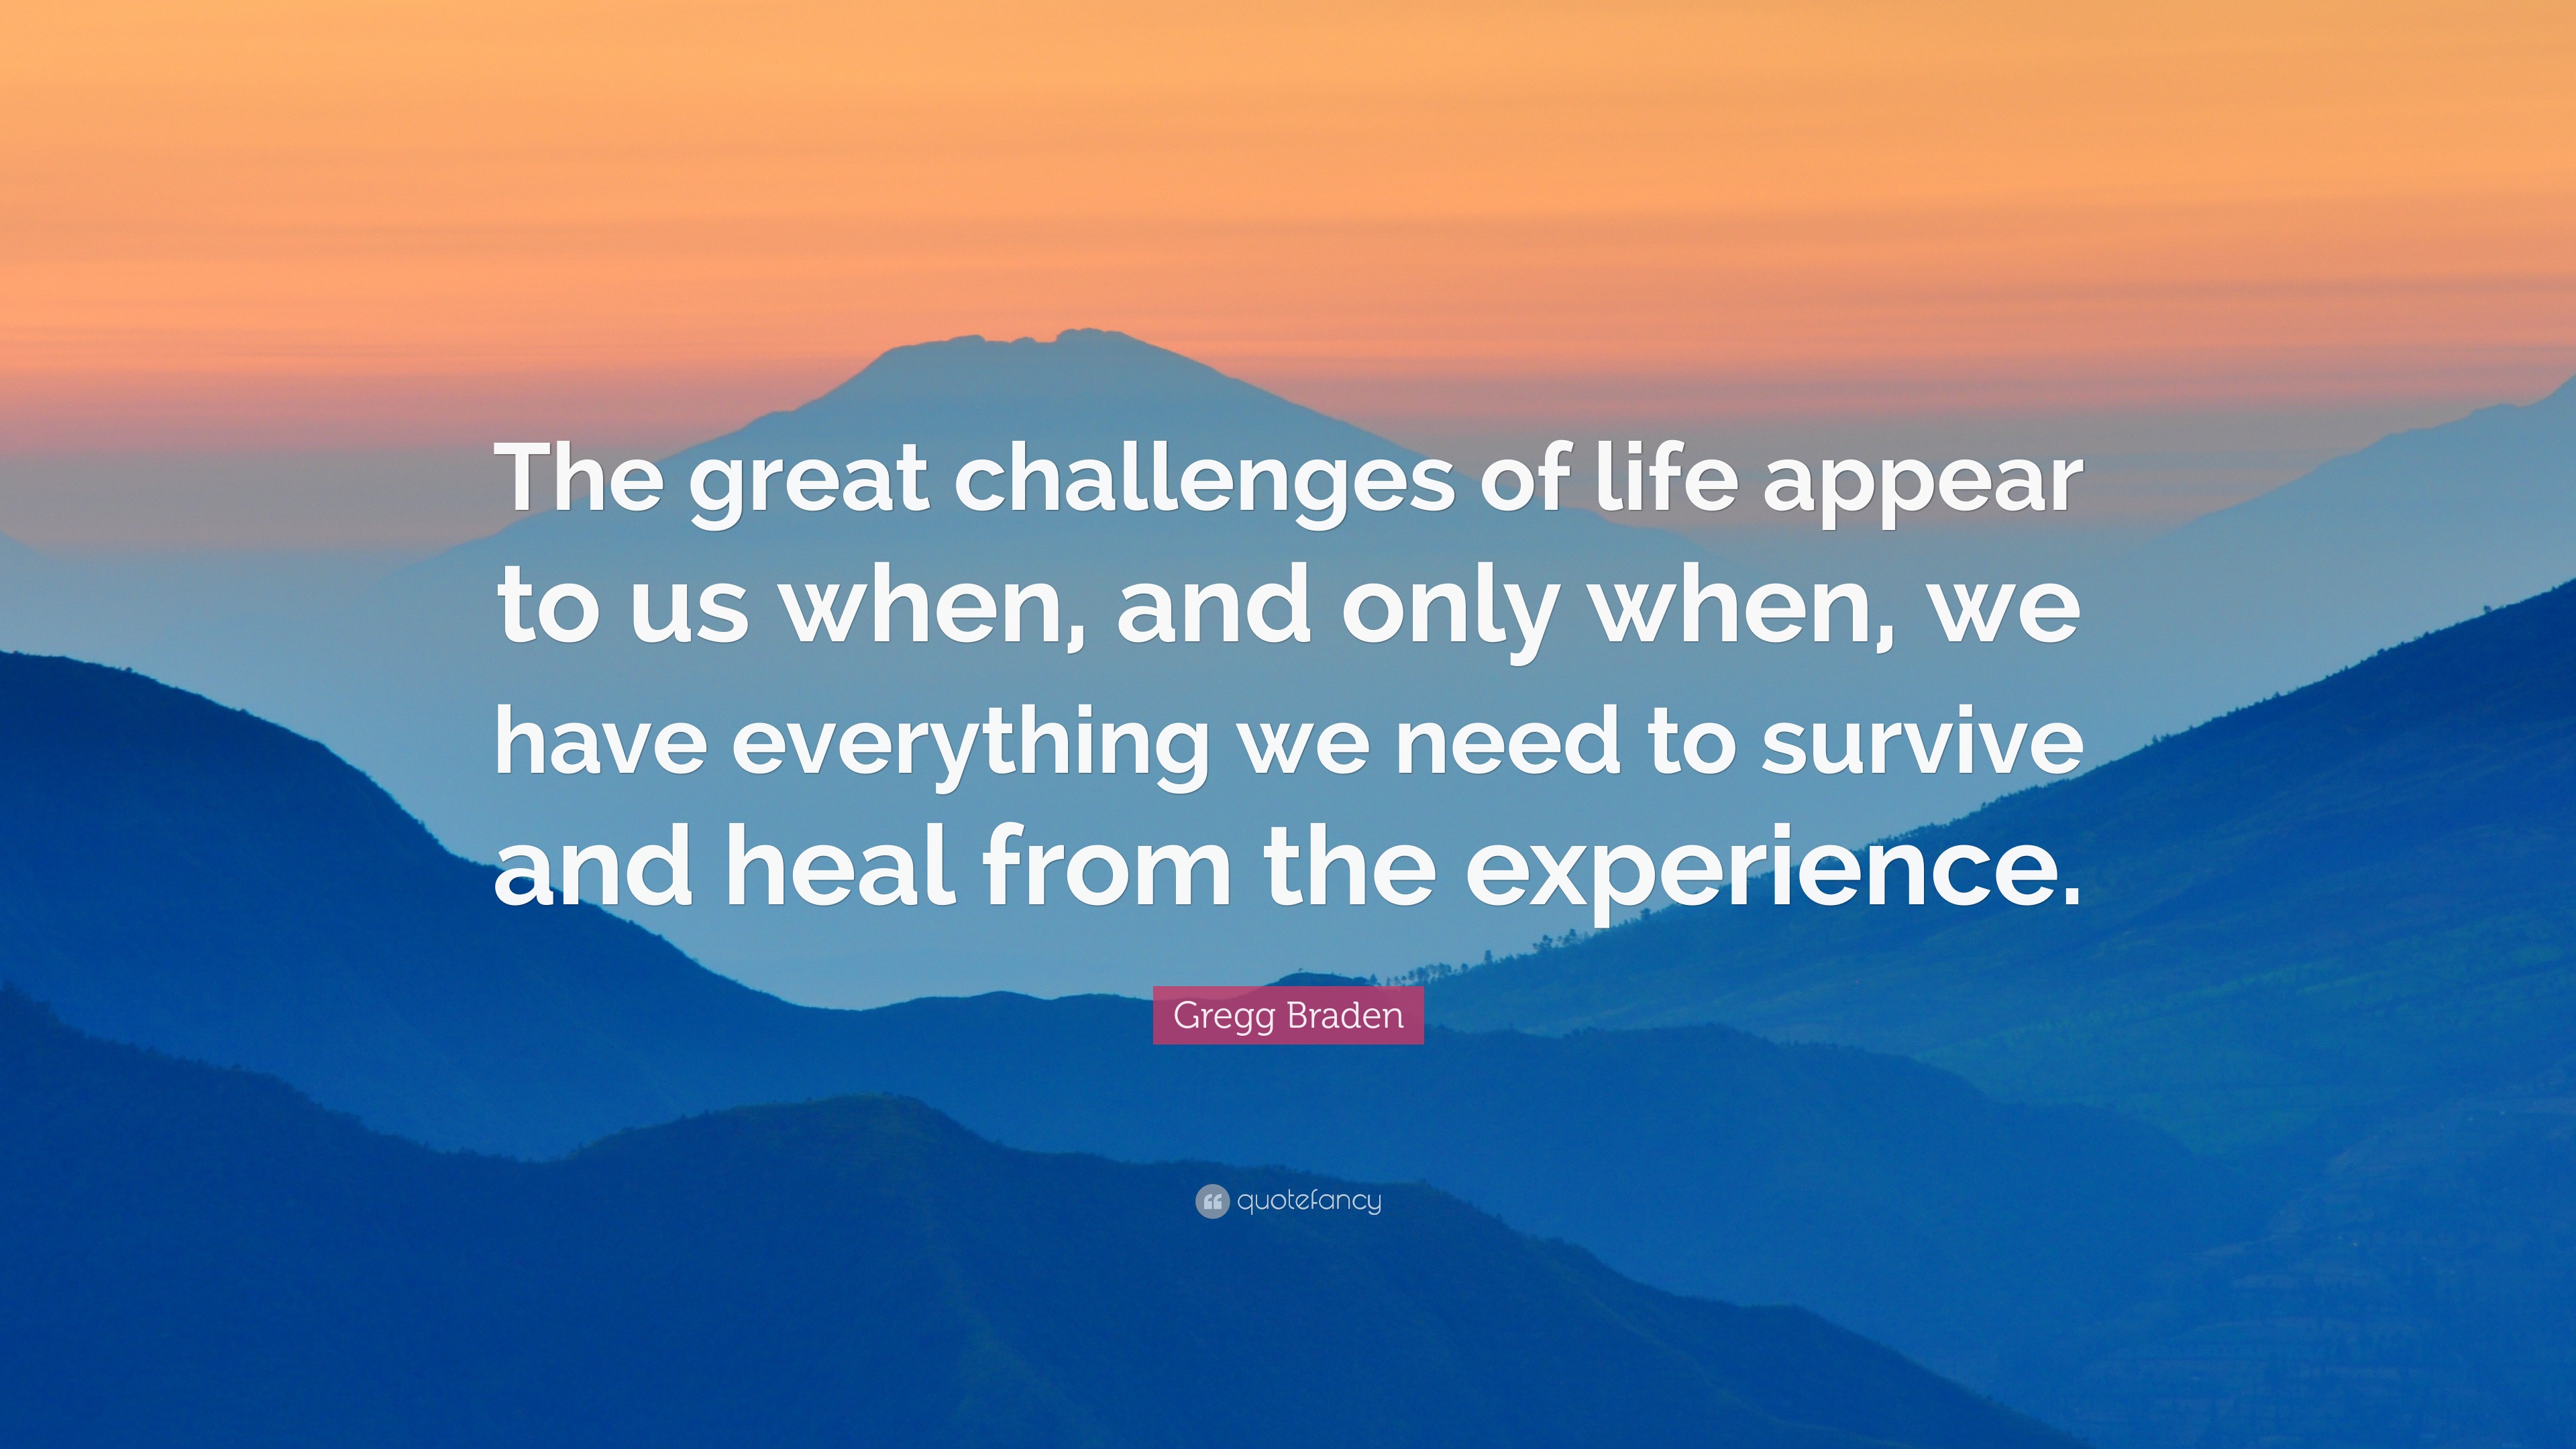 Gregg Braden Quote: “The great challenges of life appear to us when ...